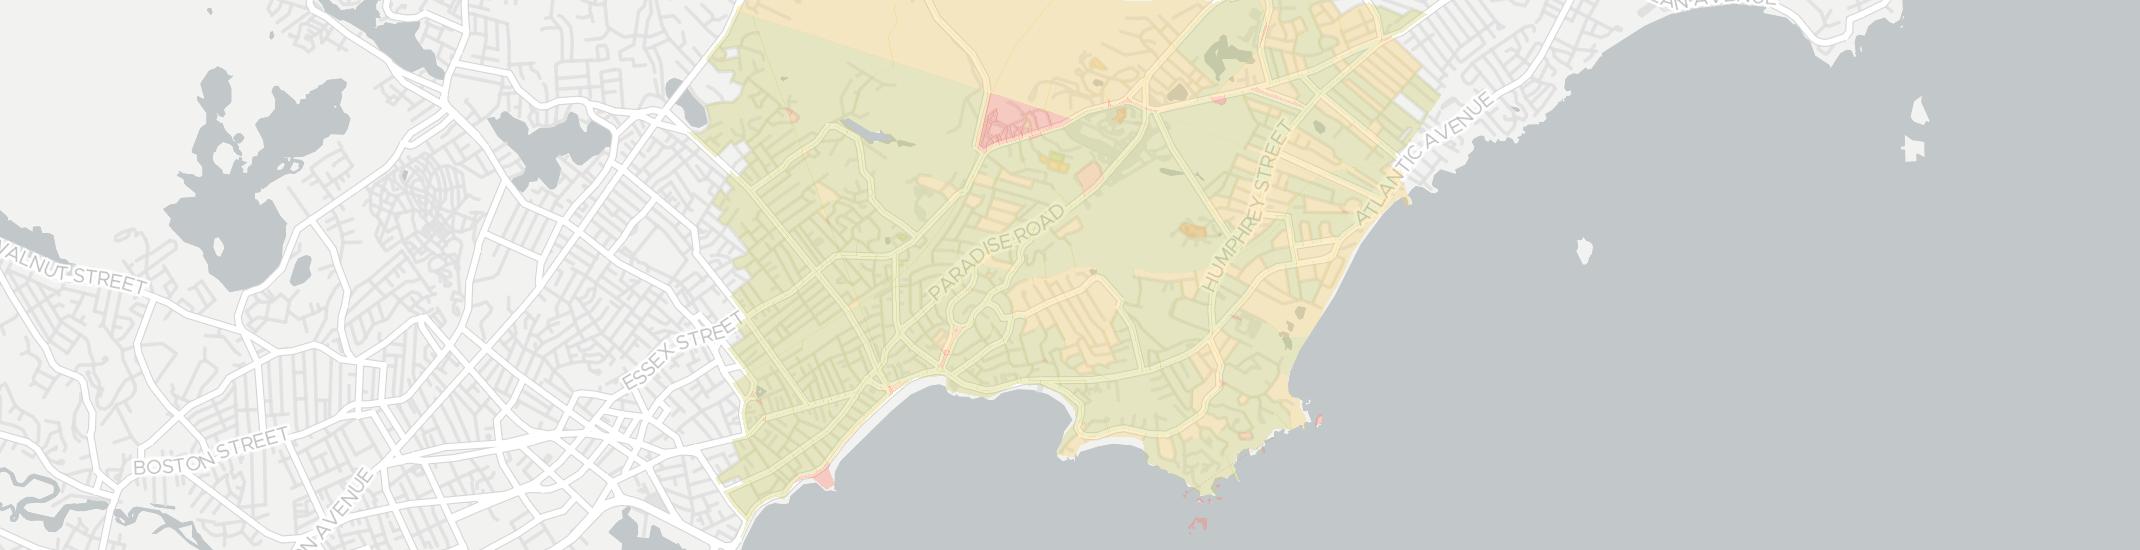 Swampscott Internet Competition Map. Click for interactive map